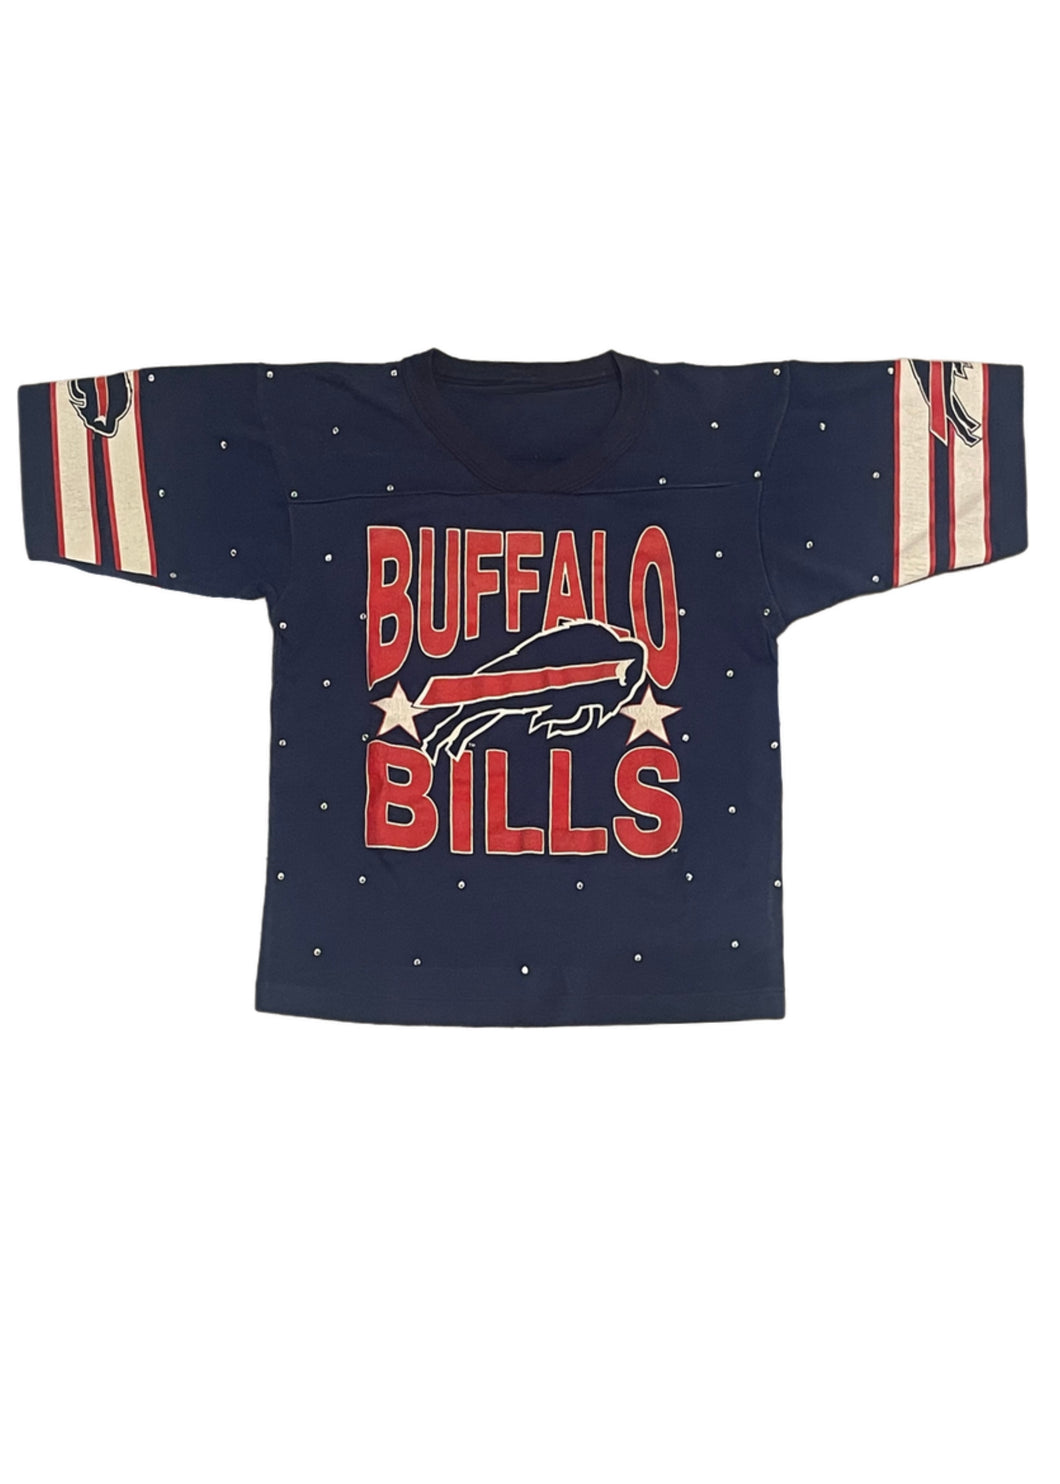 Buffalo Bills, Football One of a KIND Kids Vintage Tee with Overall Crystal Design